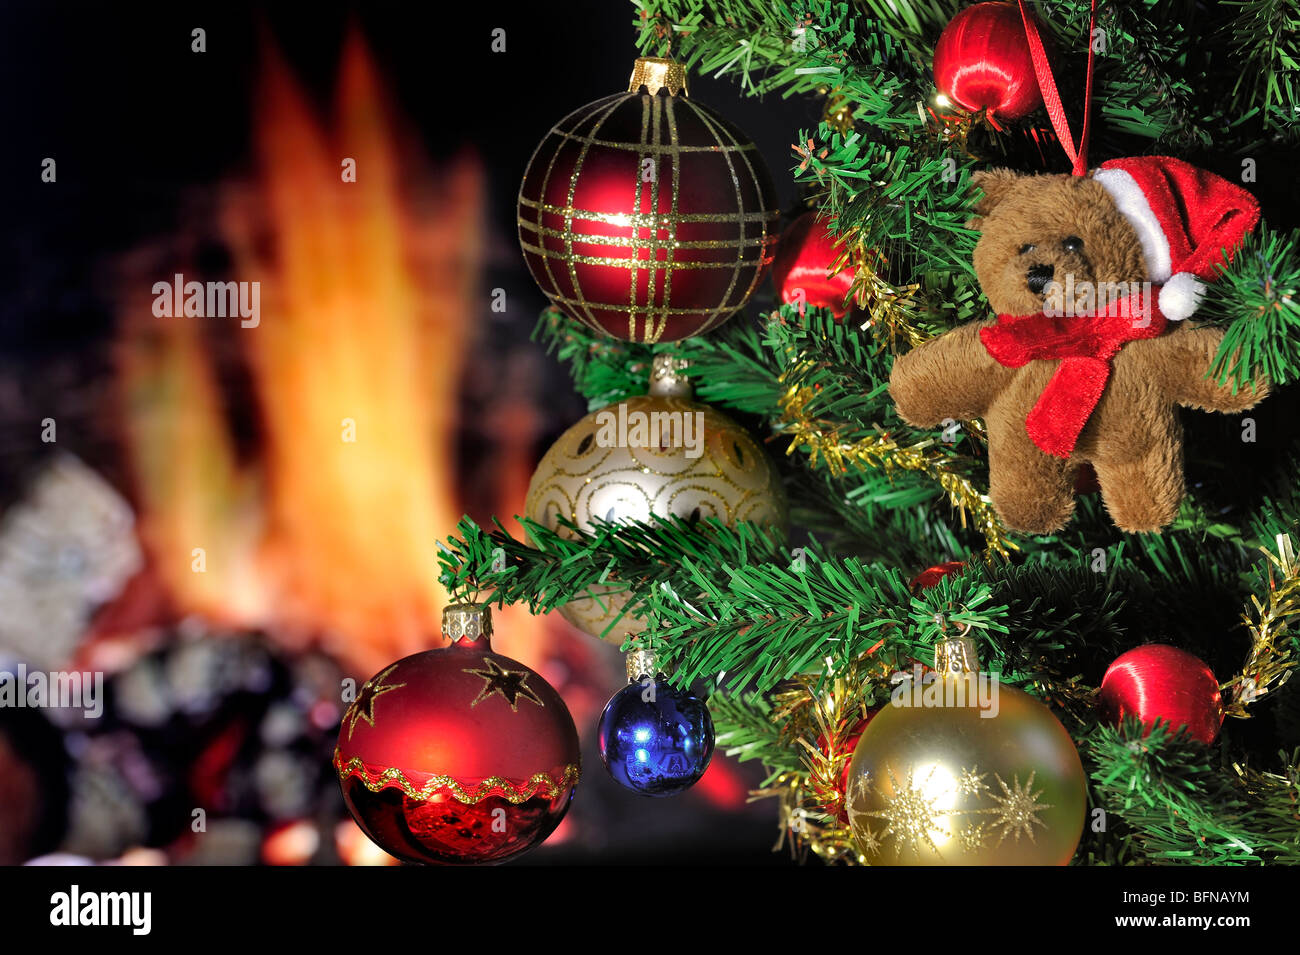 Teddy bear and bells hanging in Christmas tree in front of hearth / fireplace Stock Photo